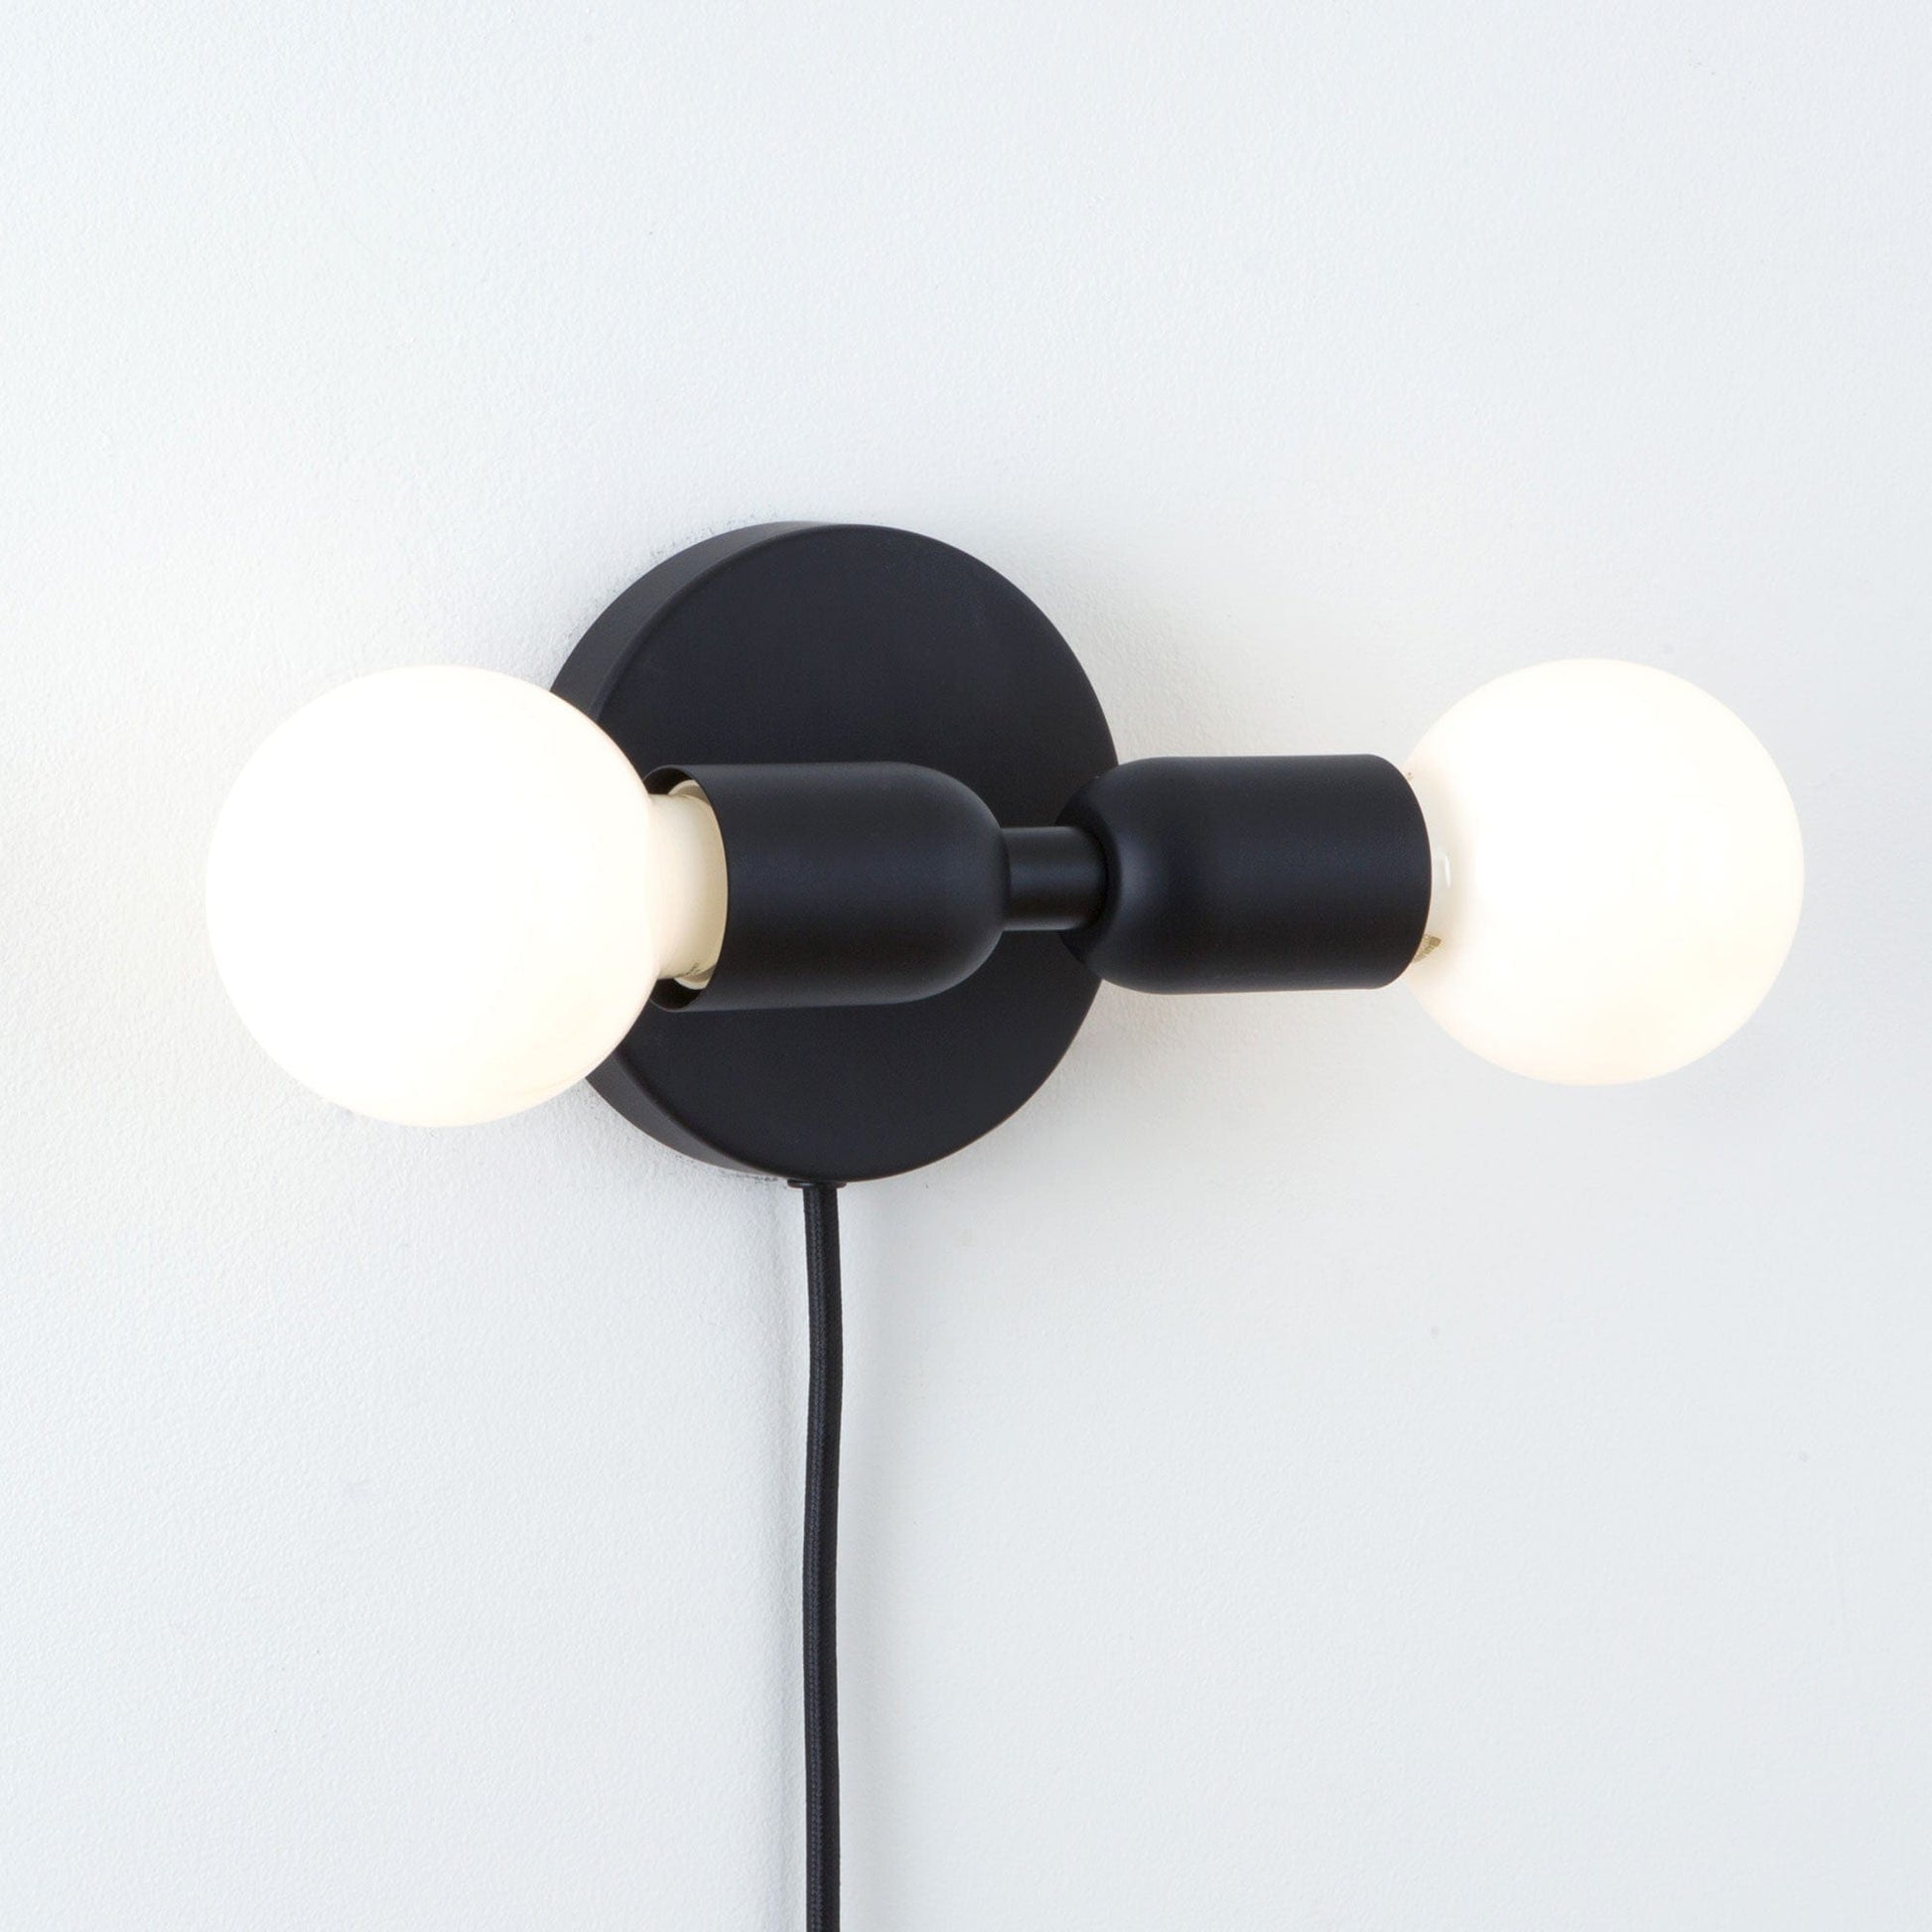 Junction Mini Duo Blug-In Sconce in Matte Black finish. Shown in horizontal orientation with G25 milk glass light bulbs